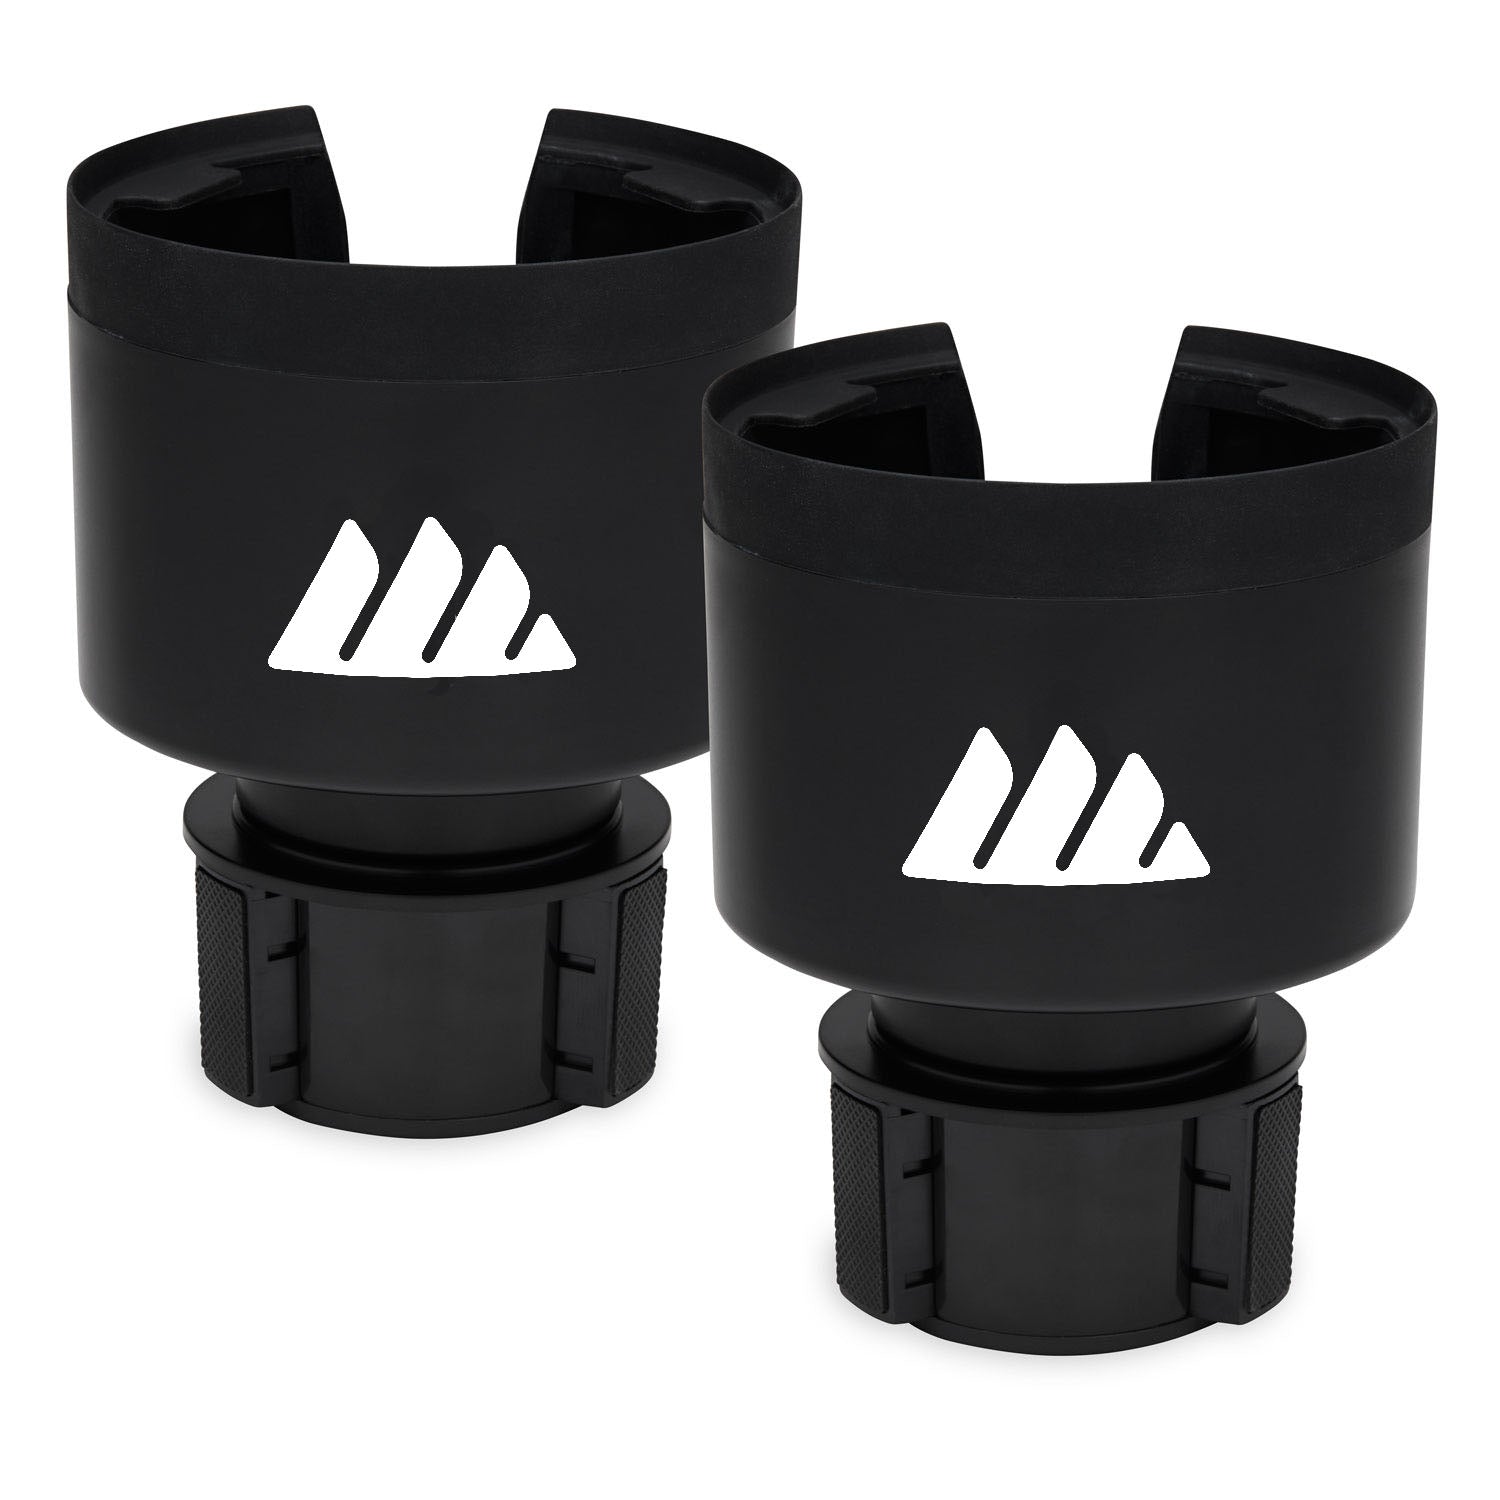 Expandable Car Cup Holder - Free Shipping